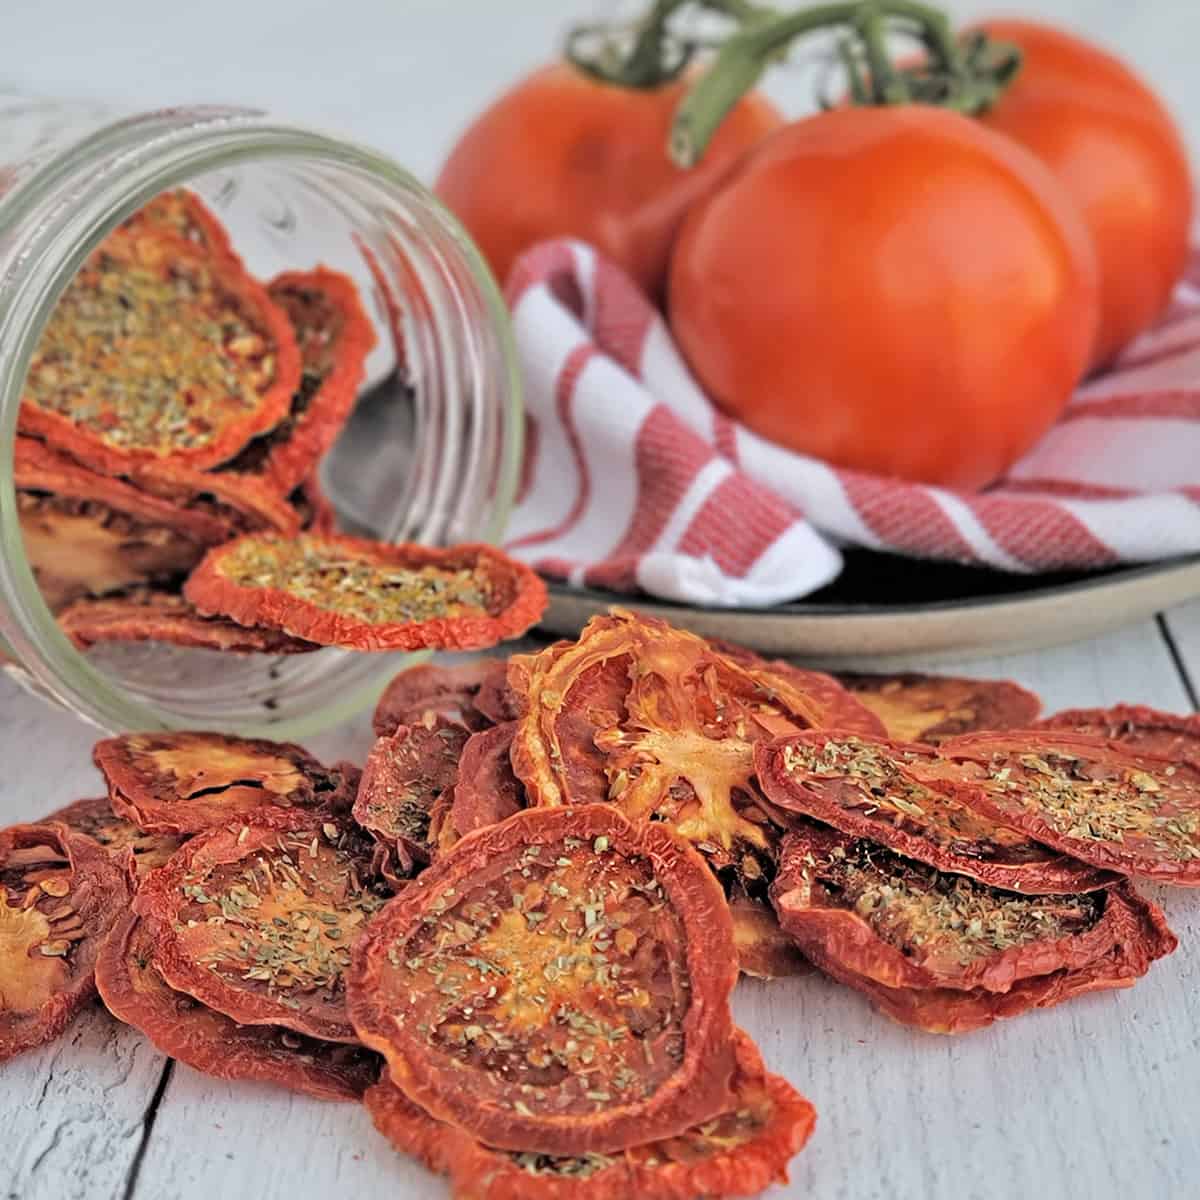 How to Make Dehydrated Tomato Chips